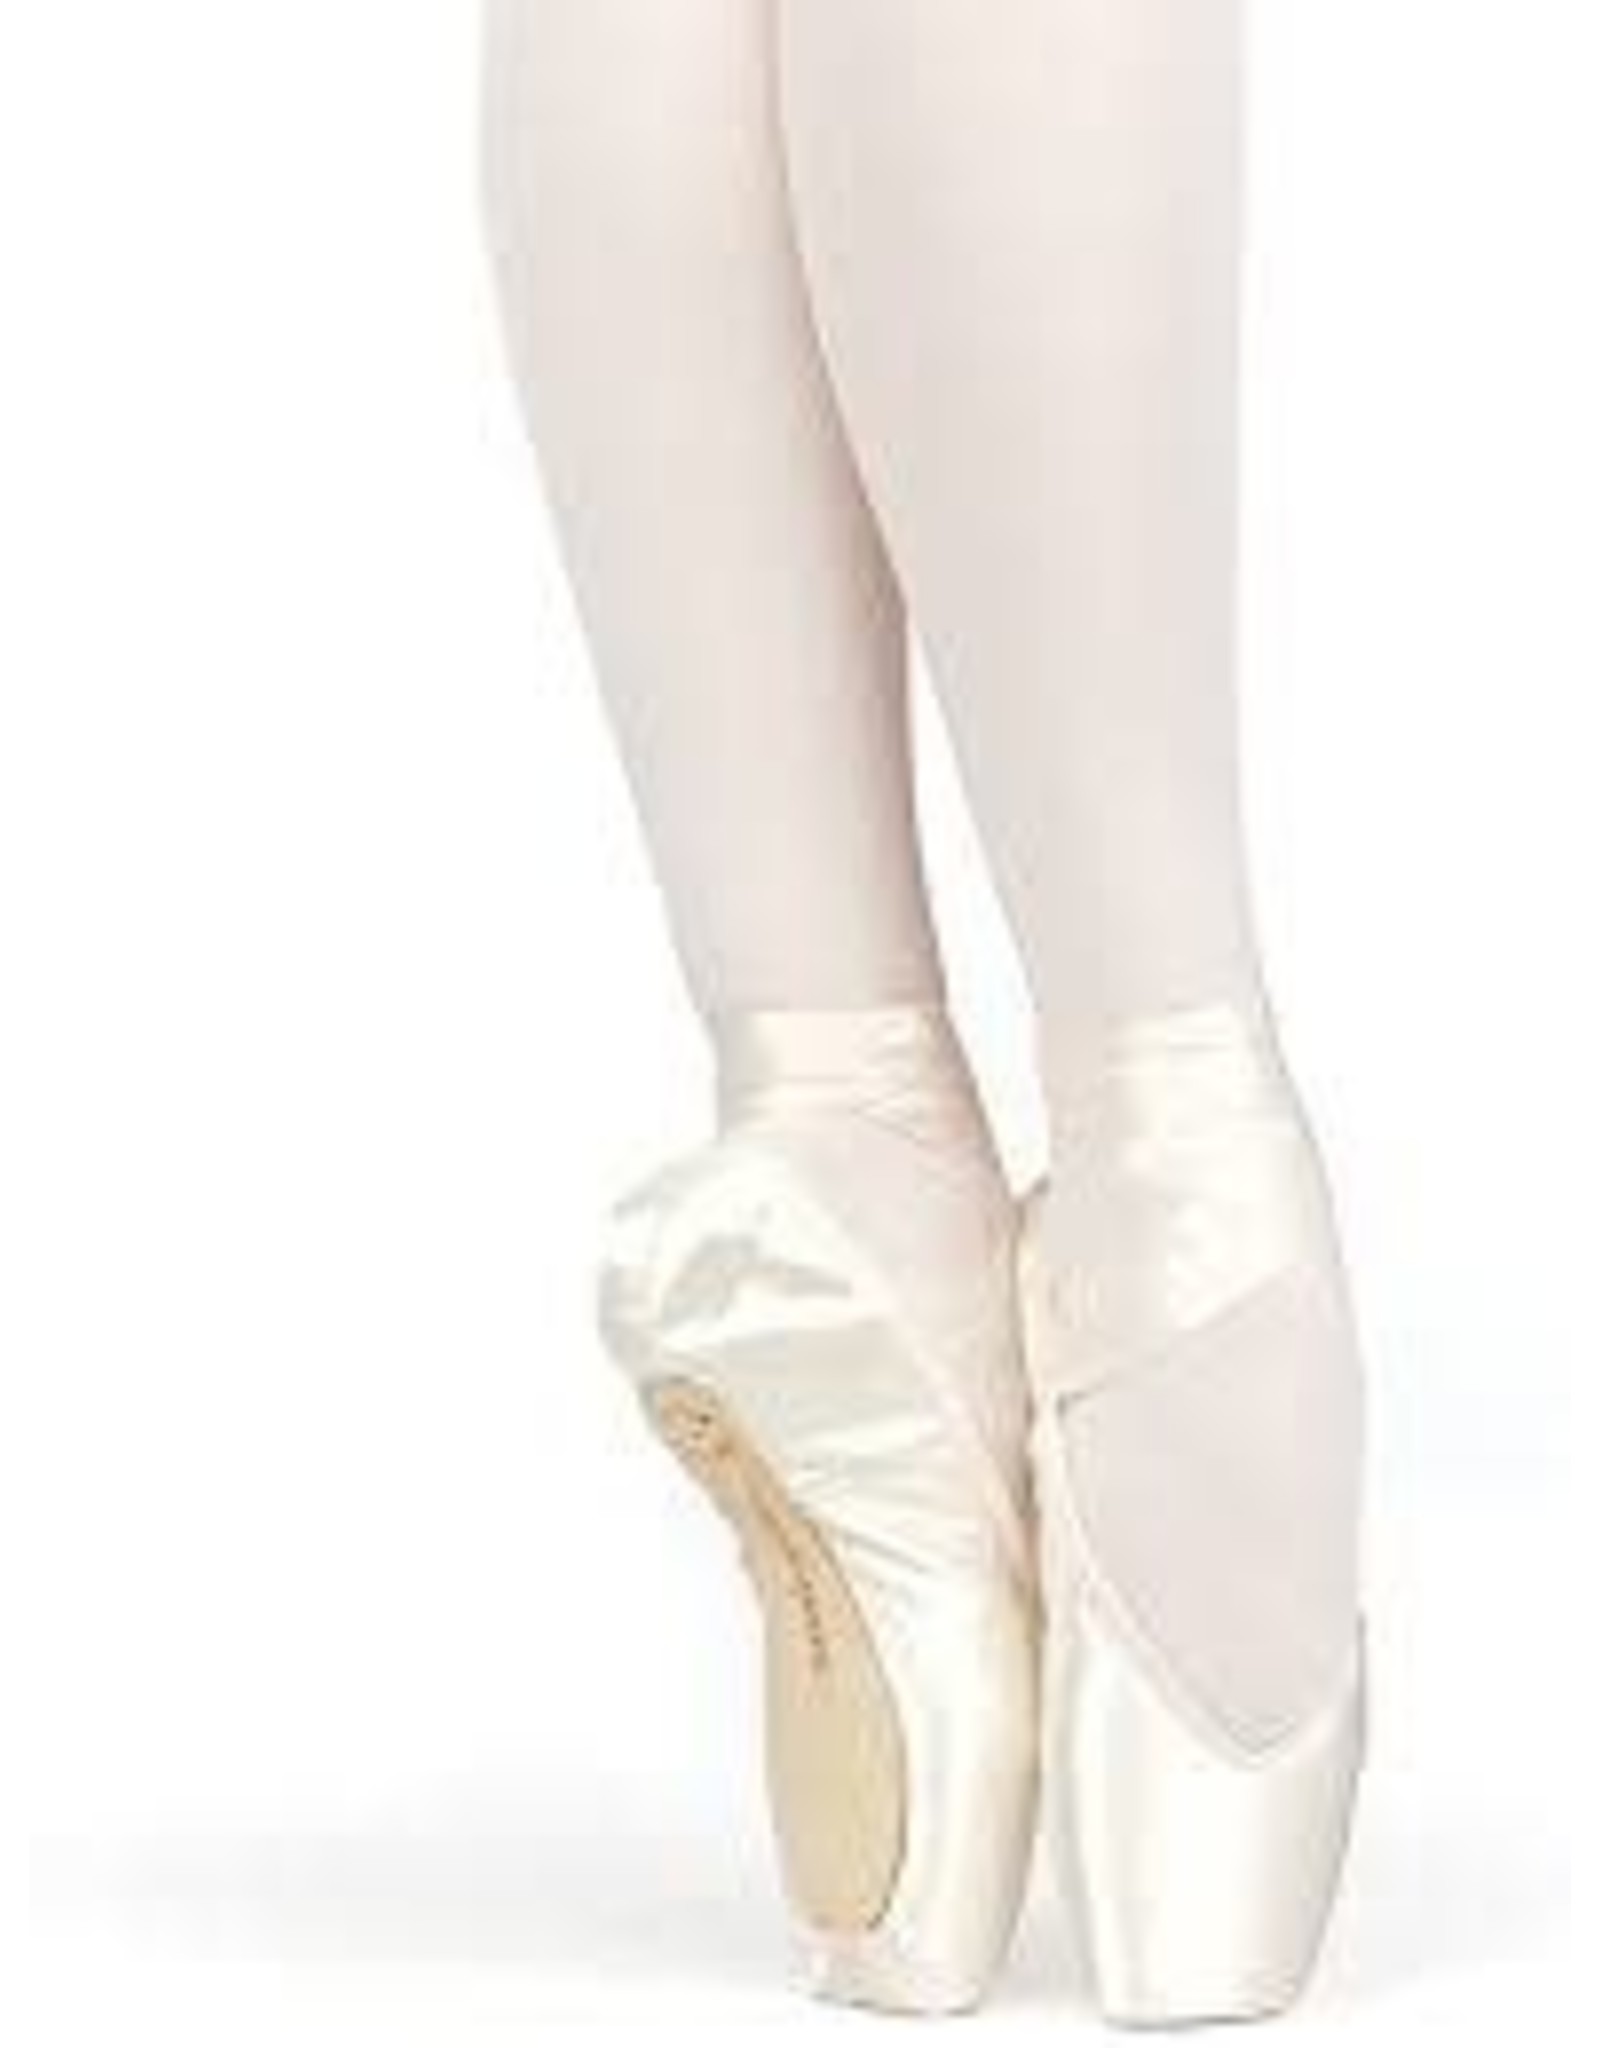 Russian Pointe Russian Pointe Muse FH shank